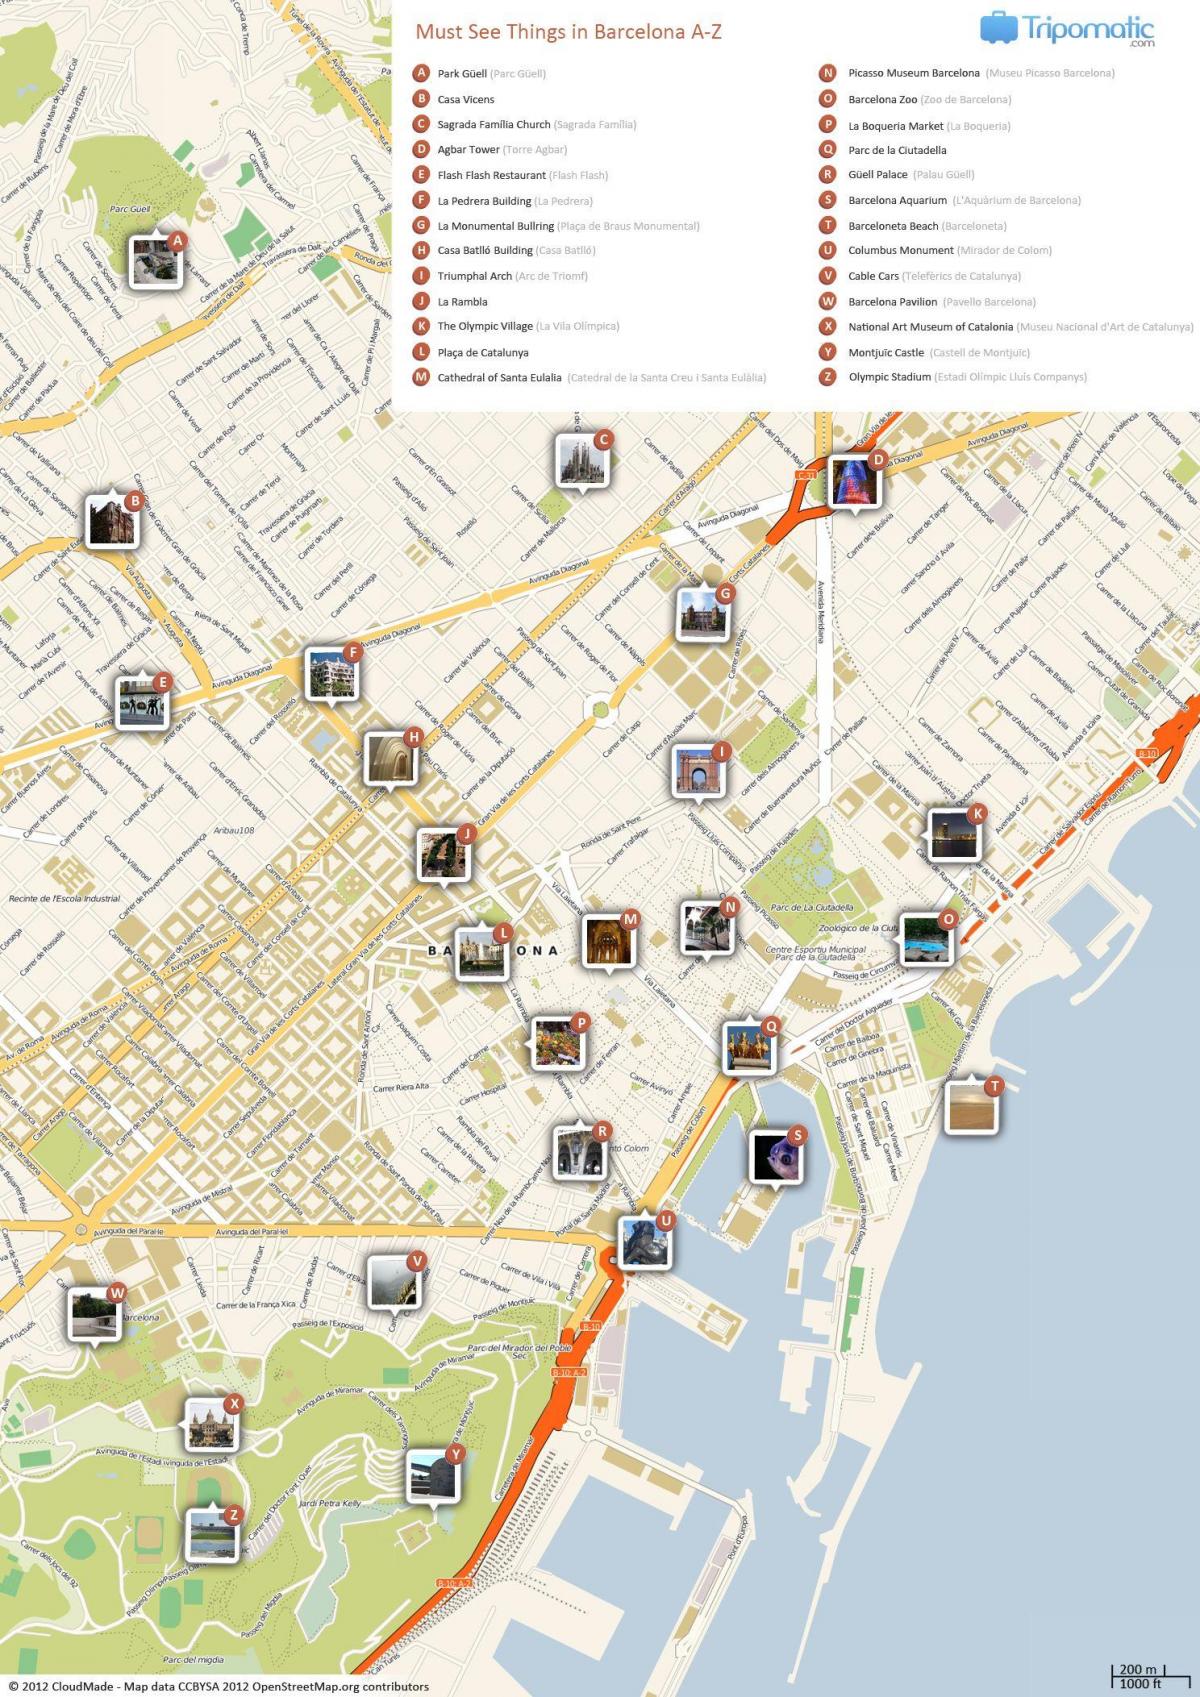 map of barcelona museums